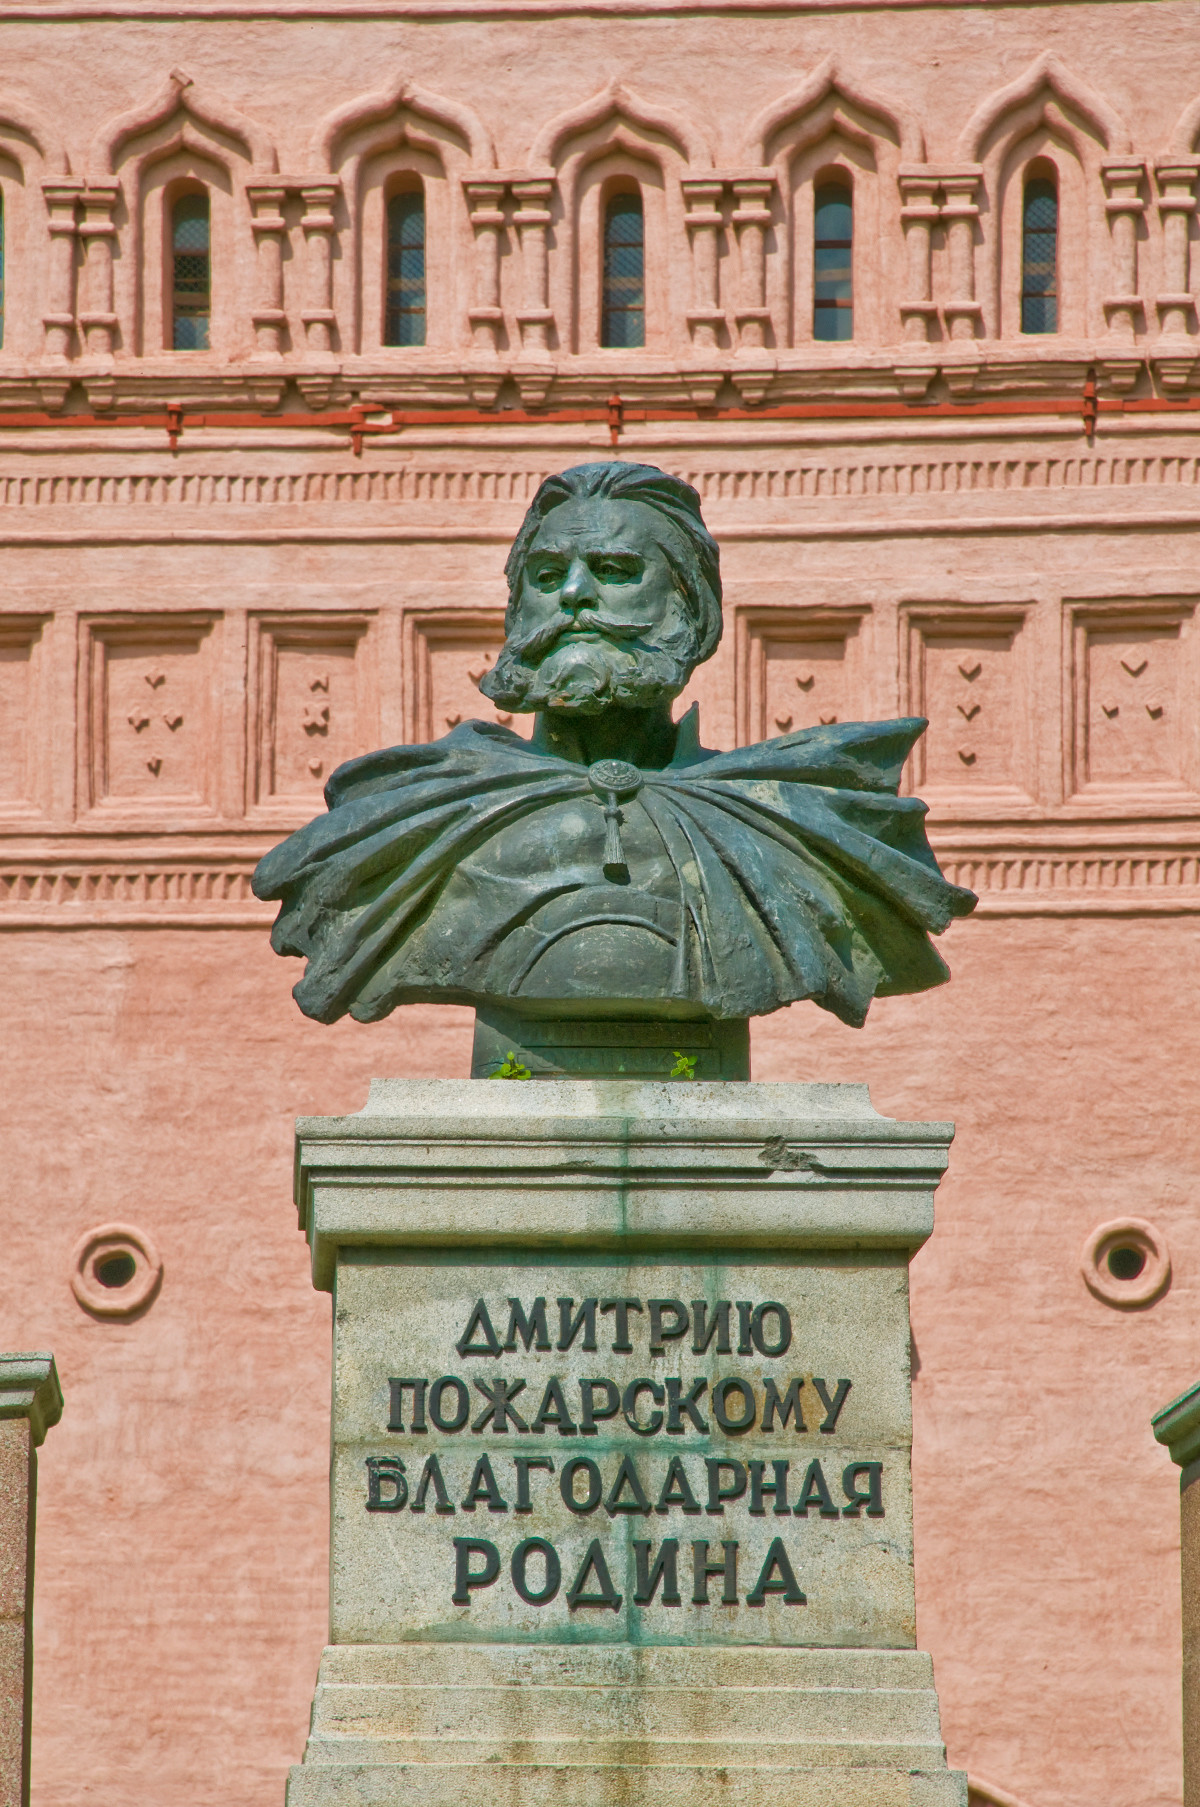 Monument to Prince Dmitry Pozharsky. Background: Main entrance tower of Savior-St. Evfimy Monastery. May 29, 2009